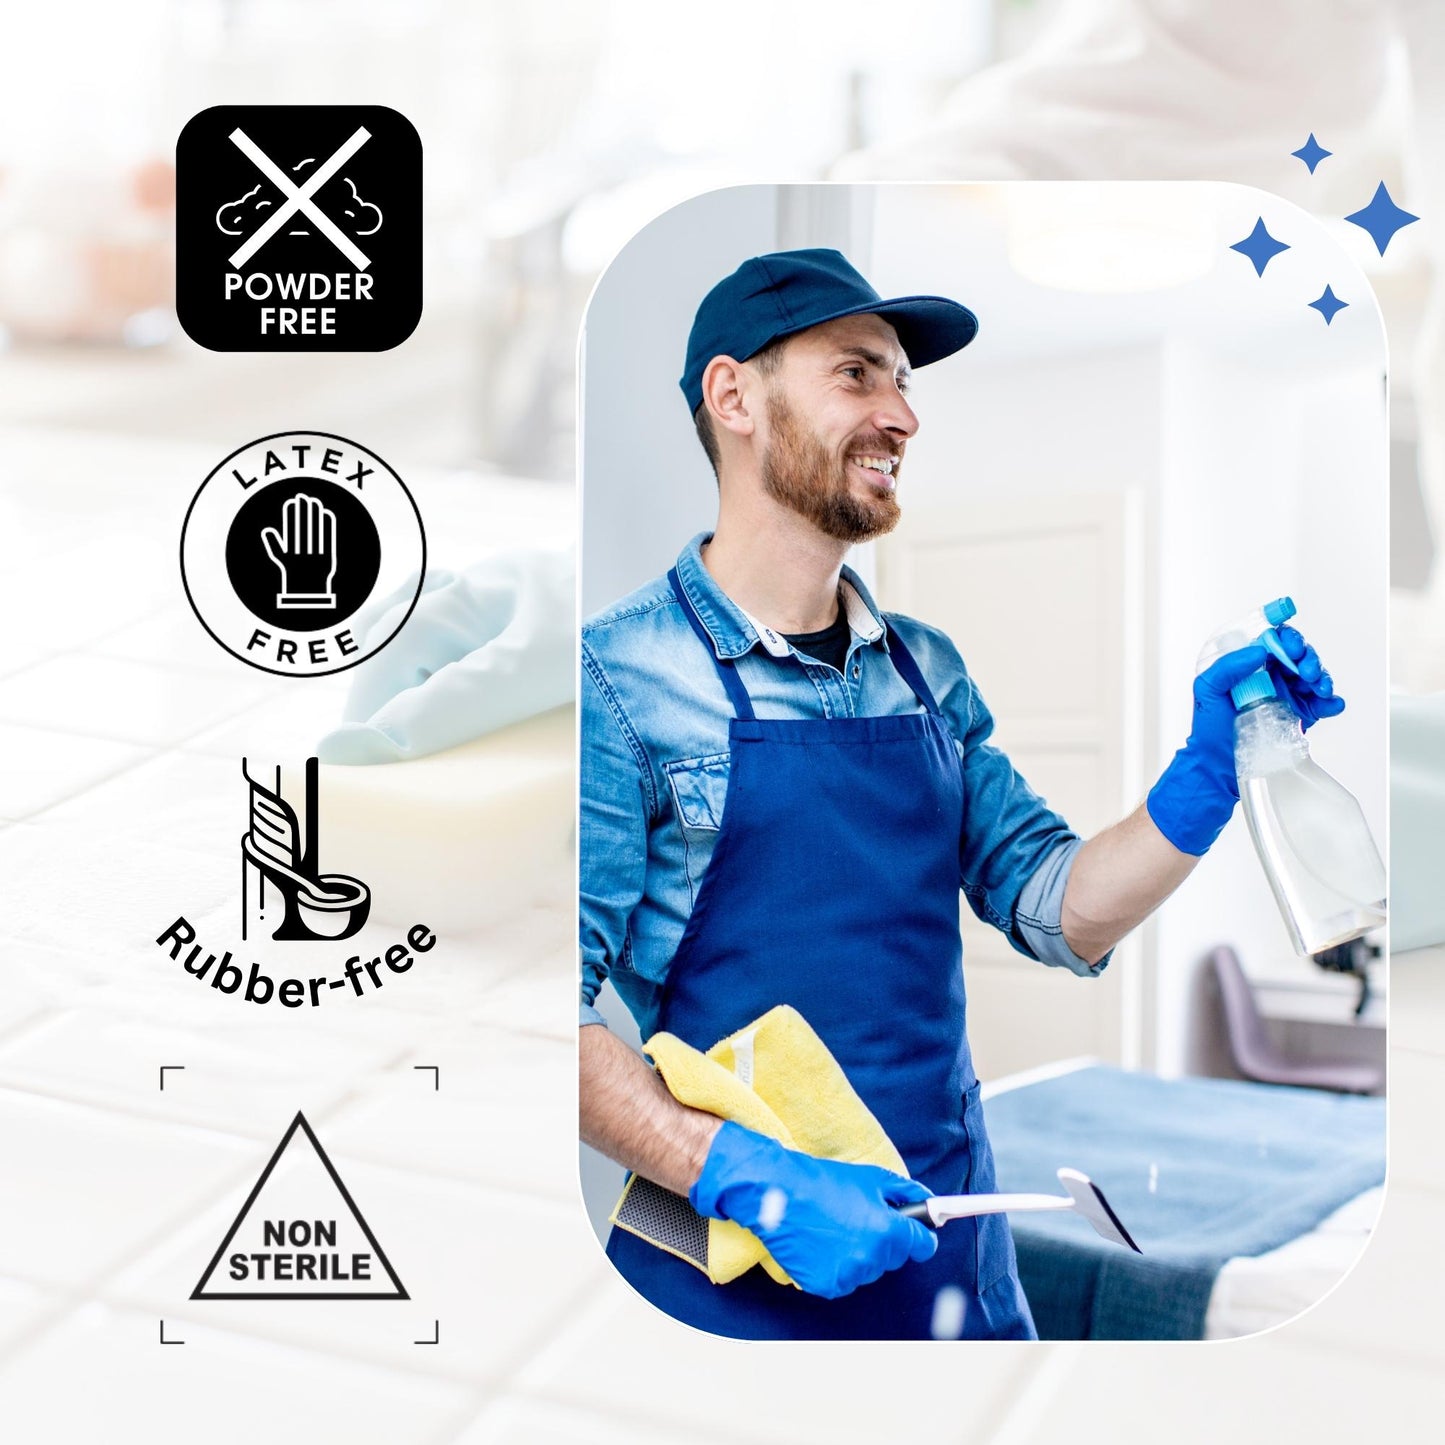 Blue Angel - 5 mils Disposable Gloves, Latex Free, Powder Free, Industrial Nitrile Gloves